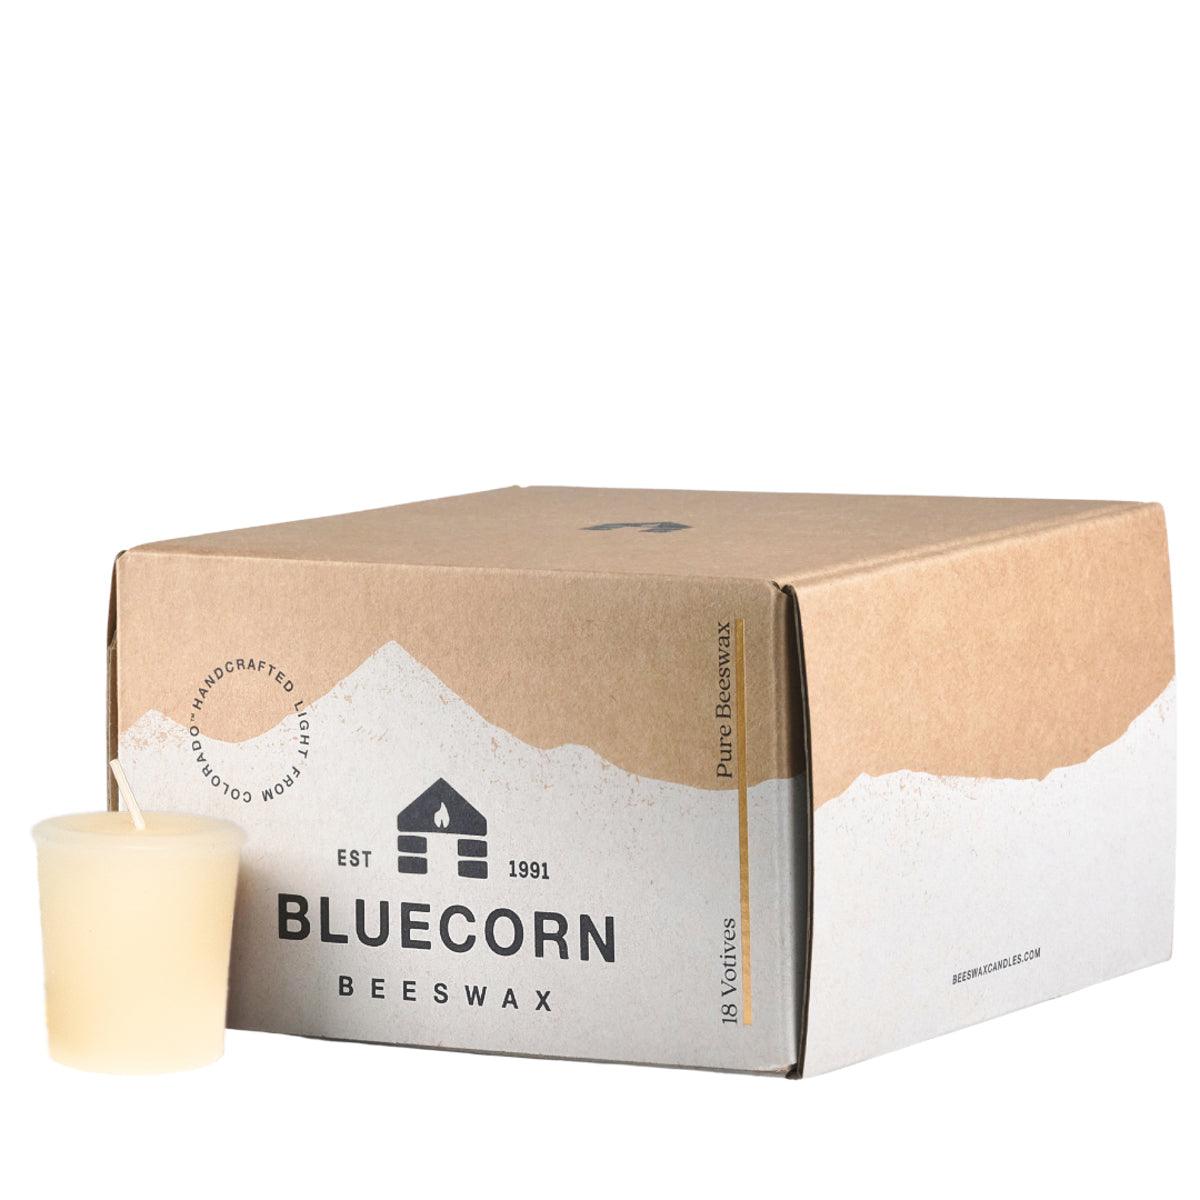 A single beeswax votive in the color ivory, sitting next to a closed 18-pack votive box